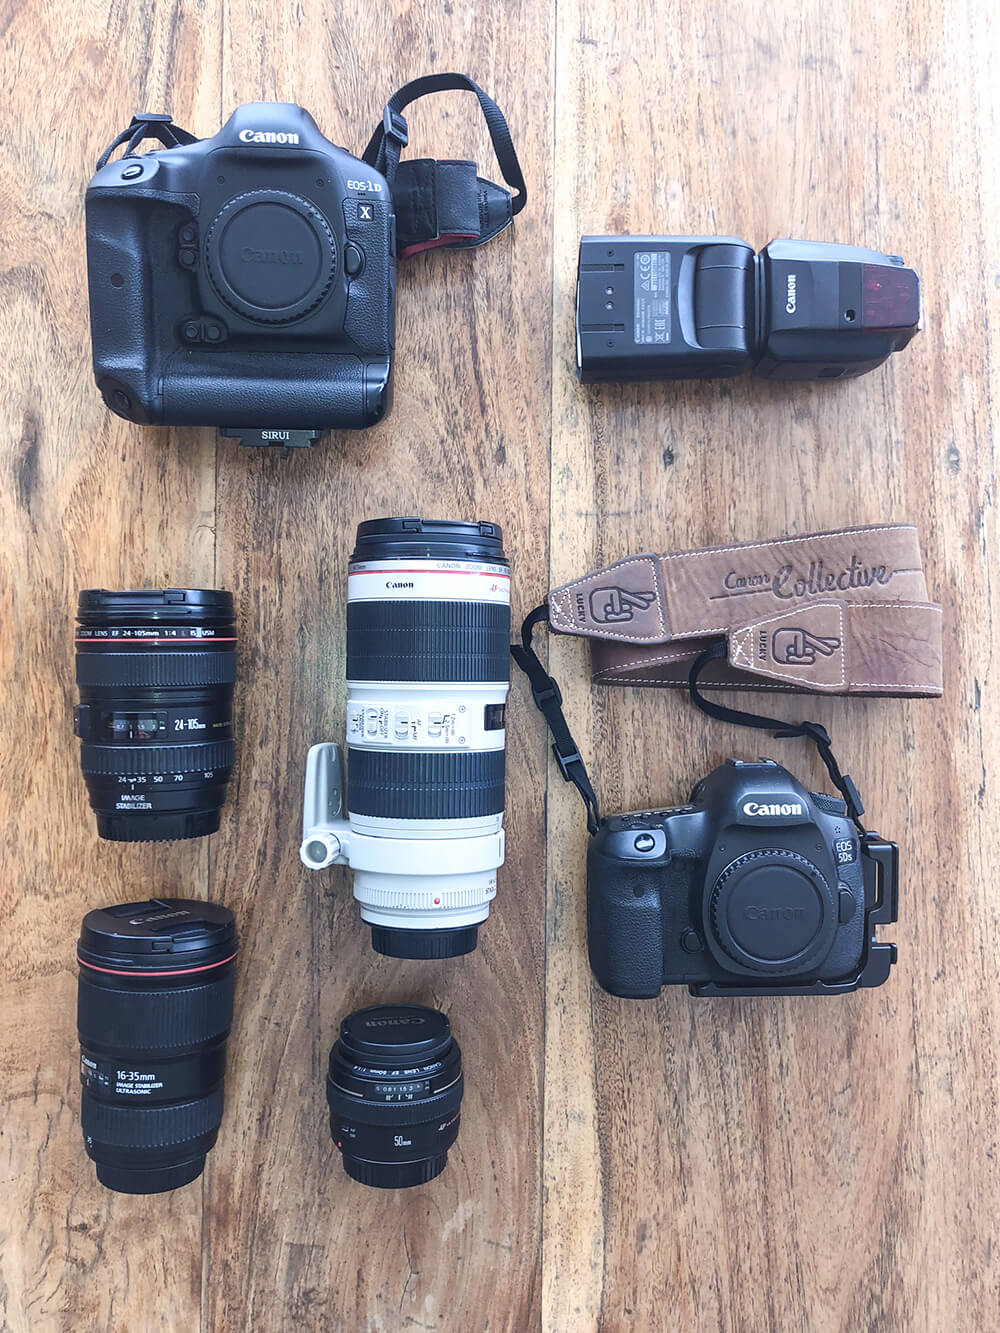 Flatlay of Jules Ingall's photography gear